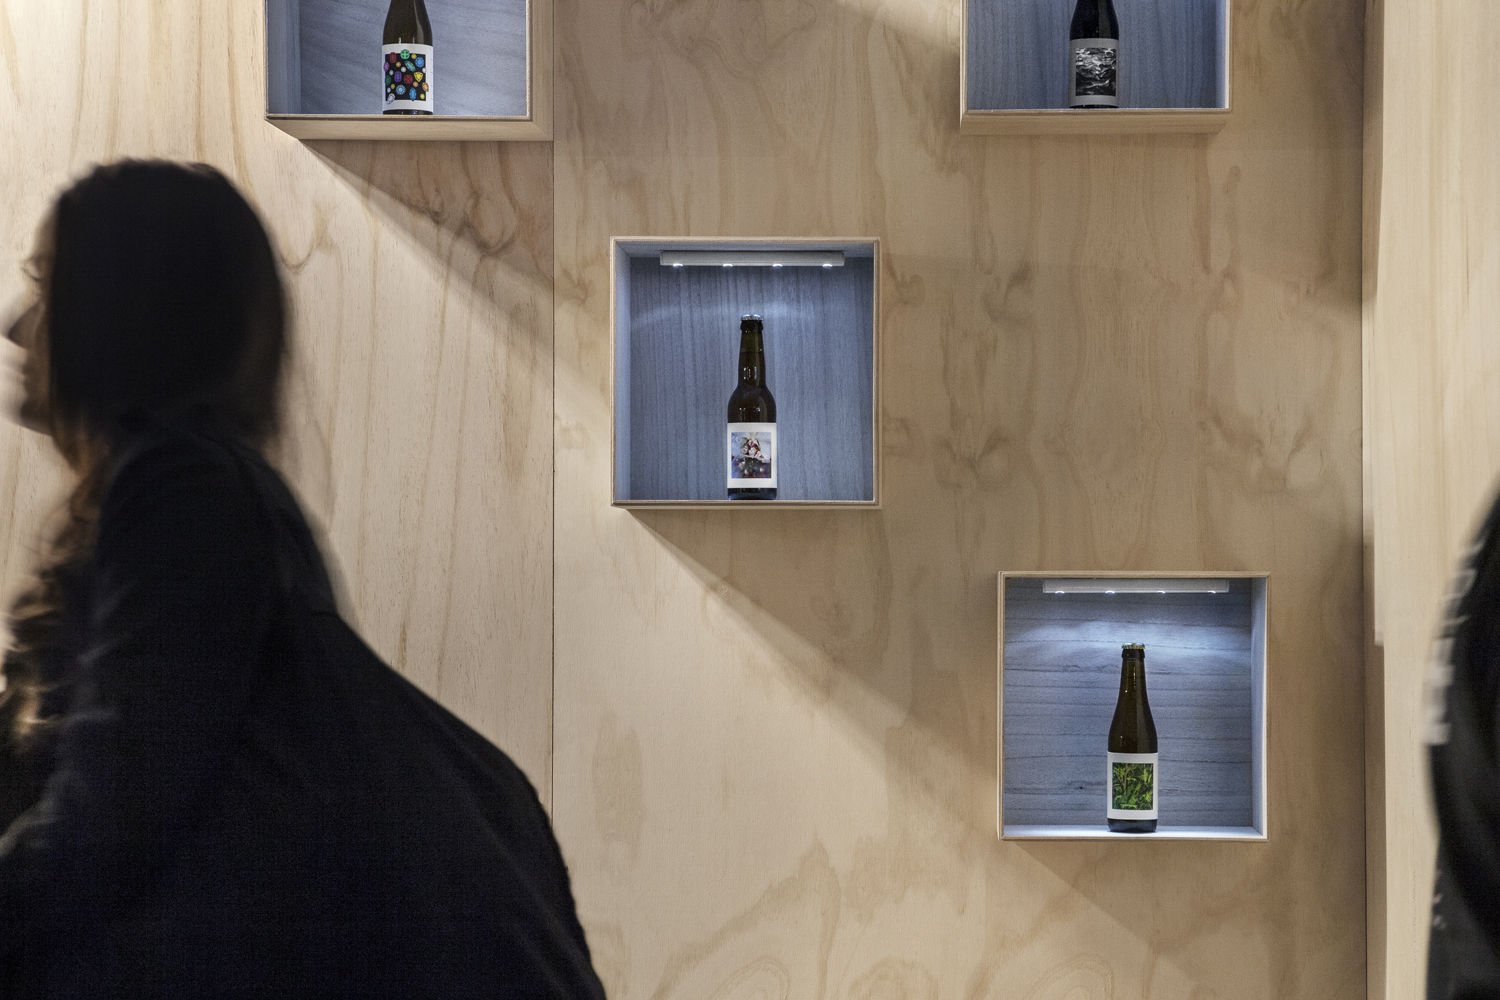 Pop-up bar for O/O Brewing designed by Emma Magnusson and Angelina Kjellén with signage by Lundgren+Lindqvist